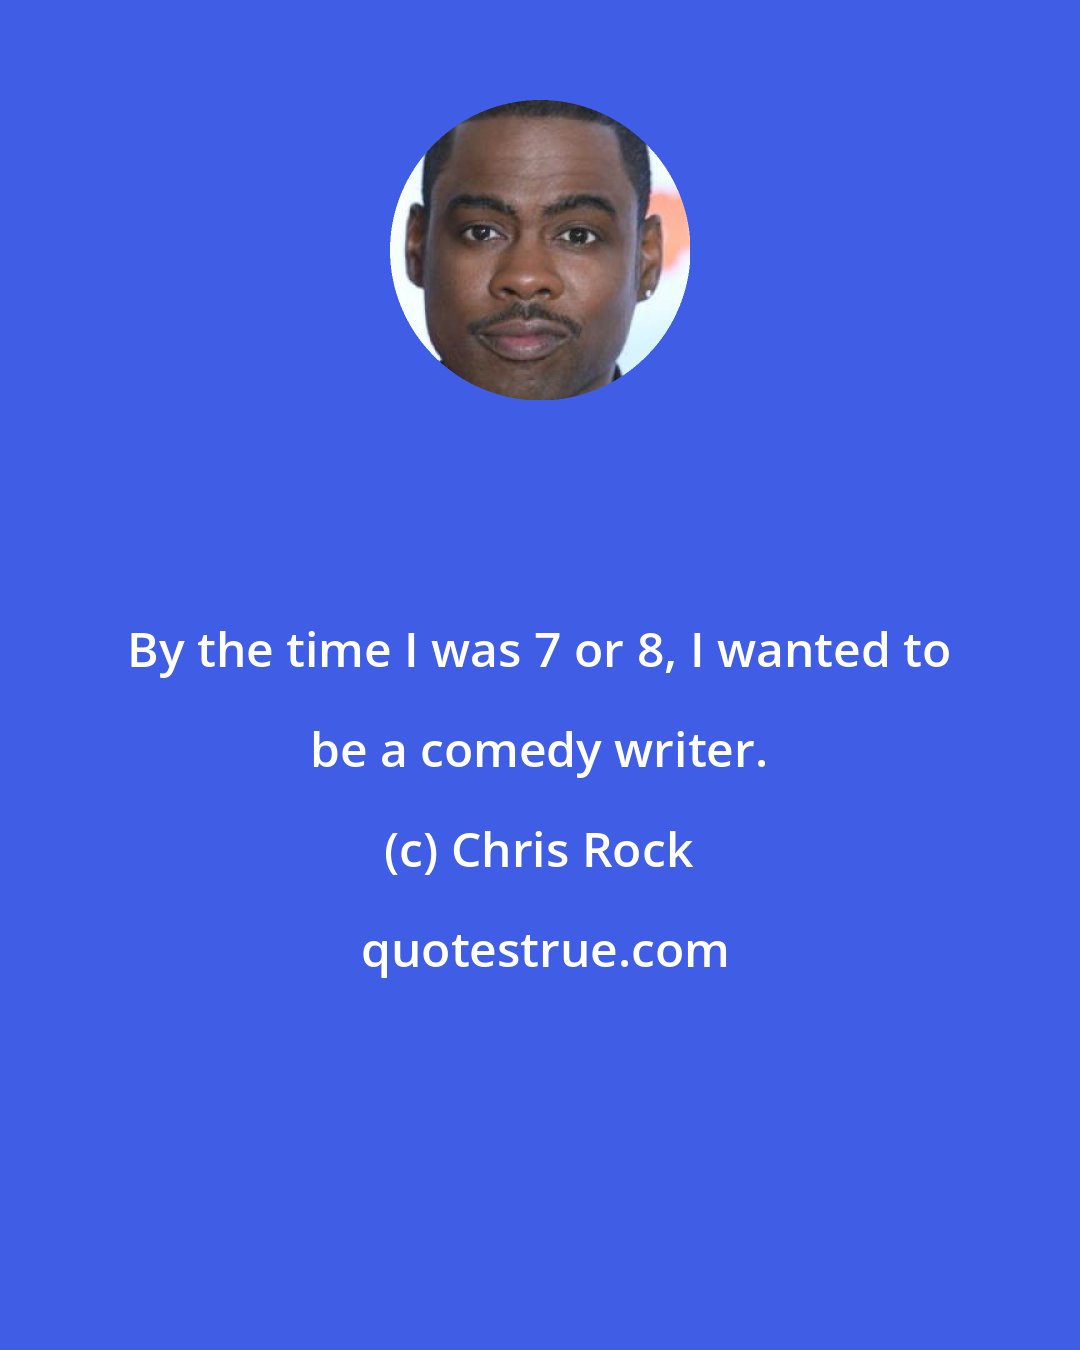 Chris Rock: By the time I was 7 or 8, I wanted to be a comedy writer.